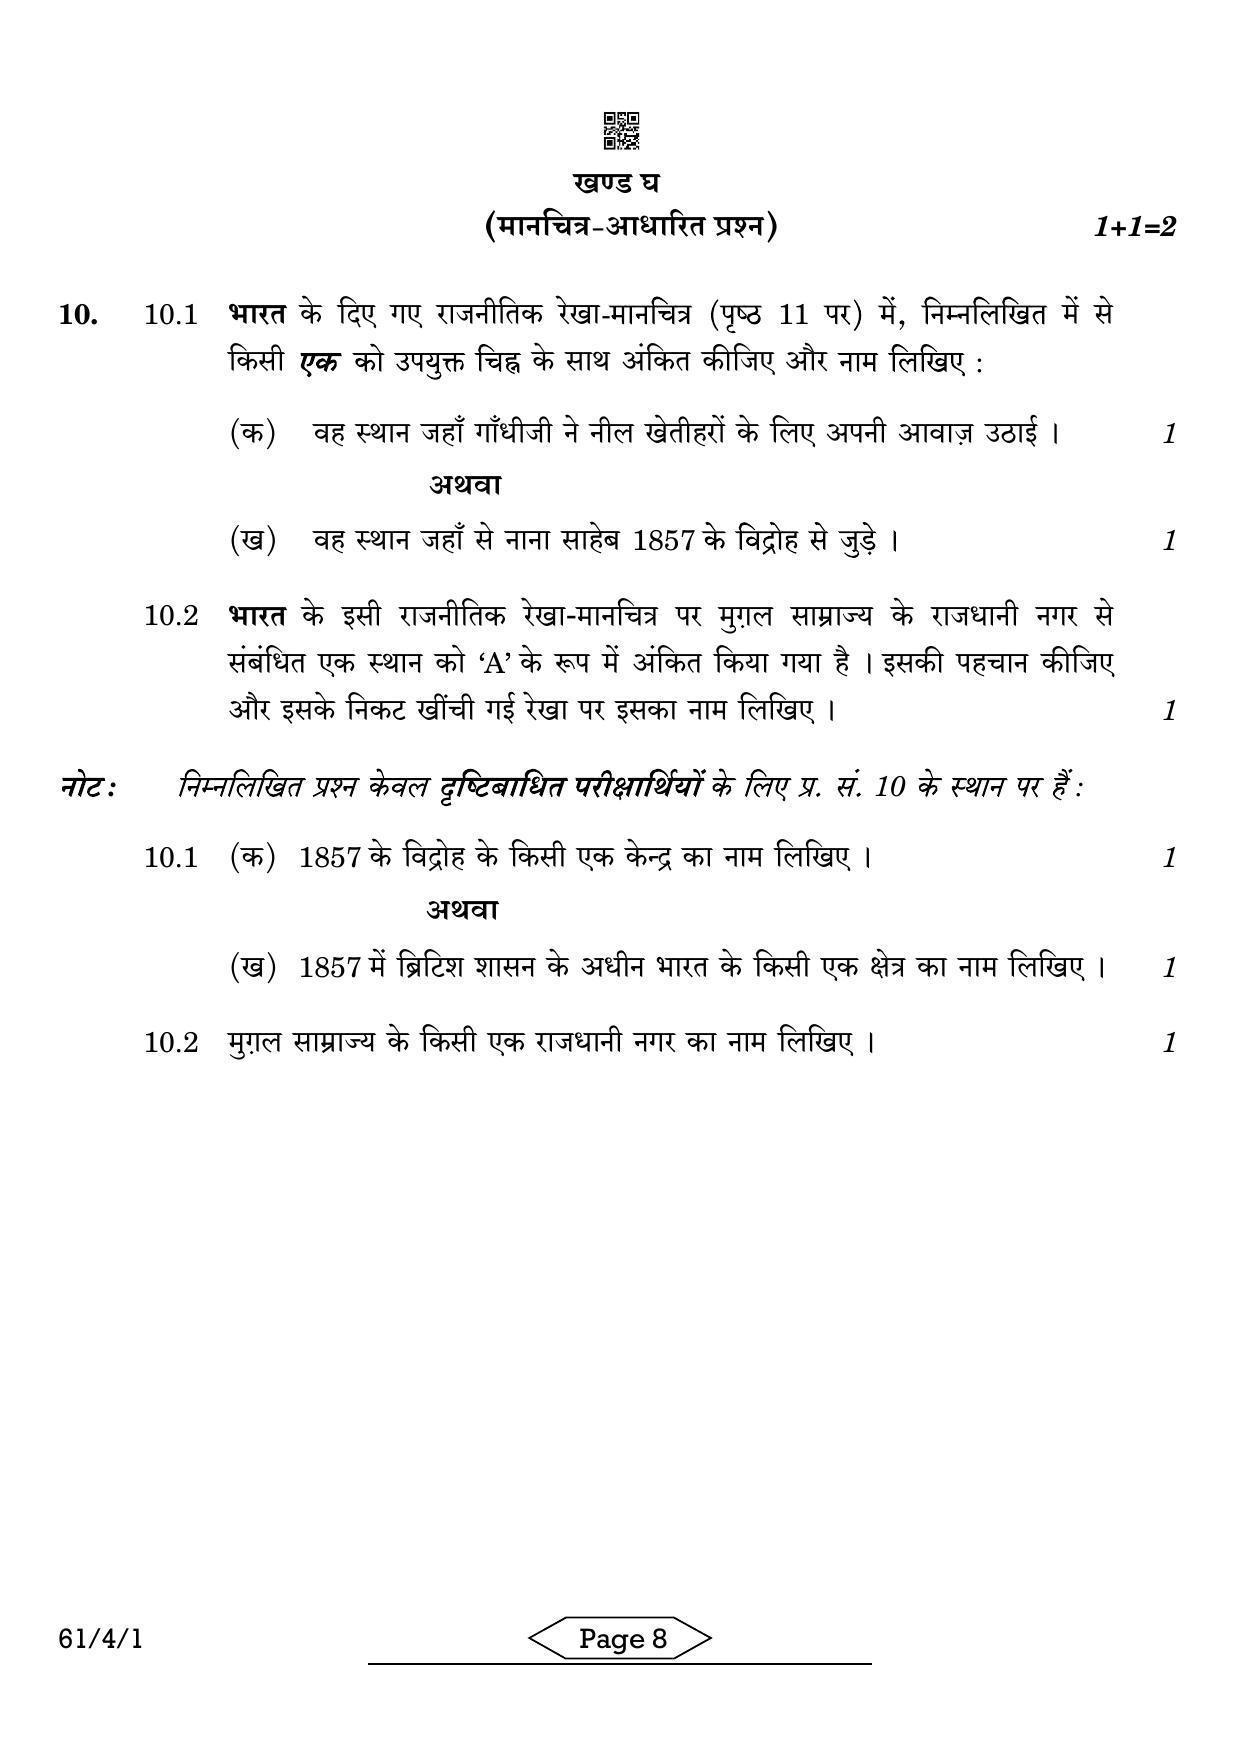 CBSE Class 12 61-4-1 History 2022 Question Paper - Page 8